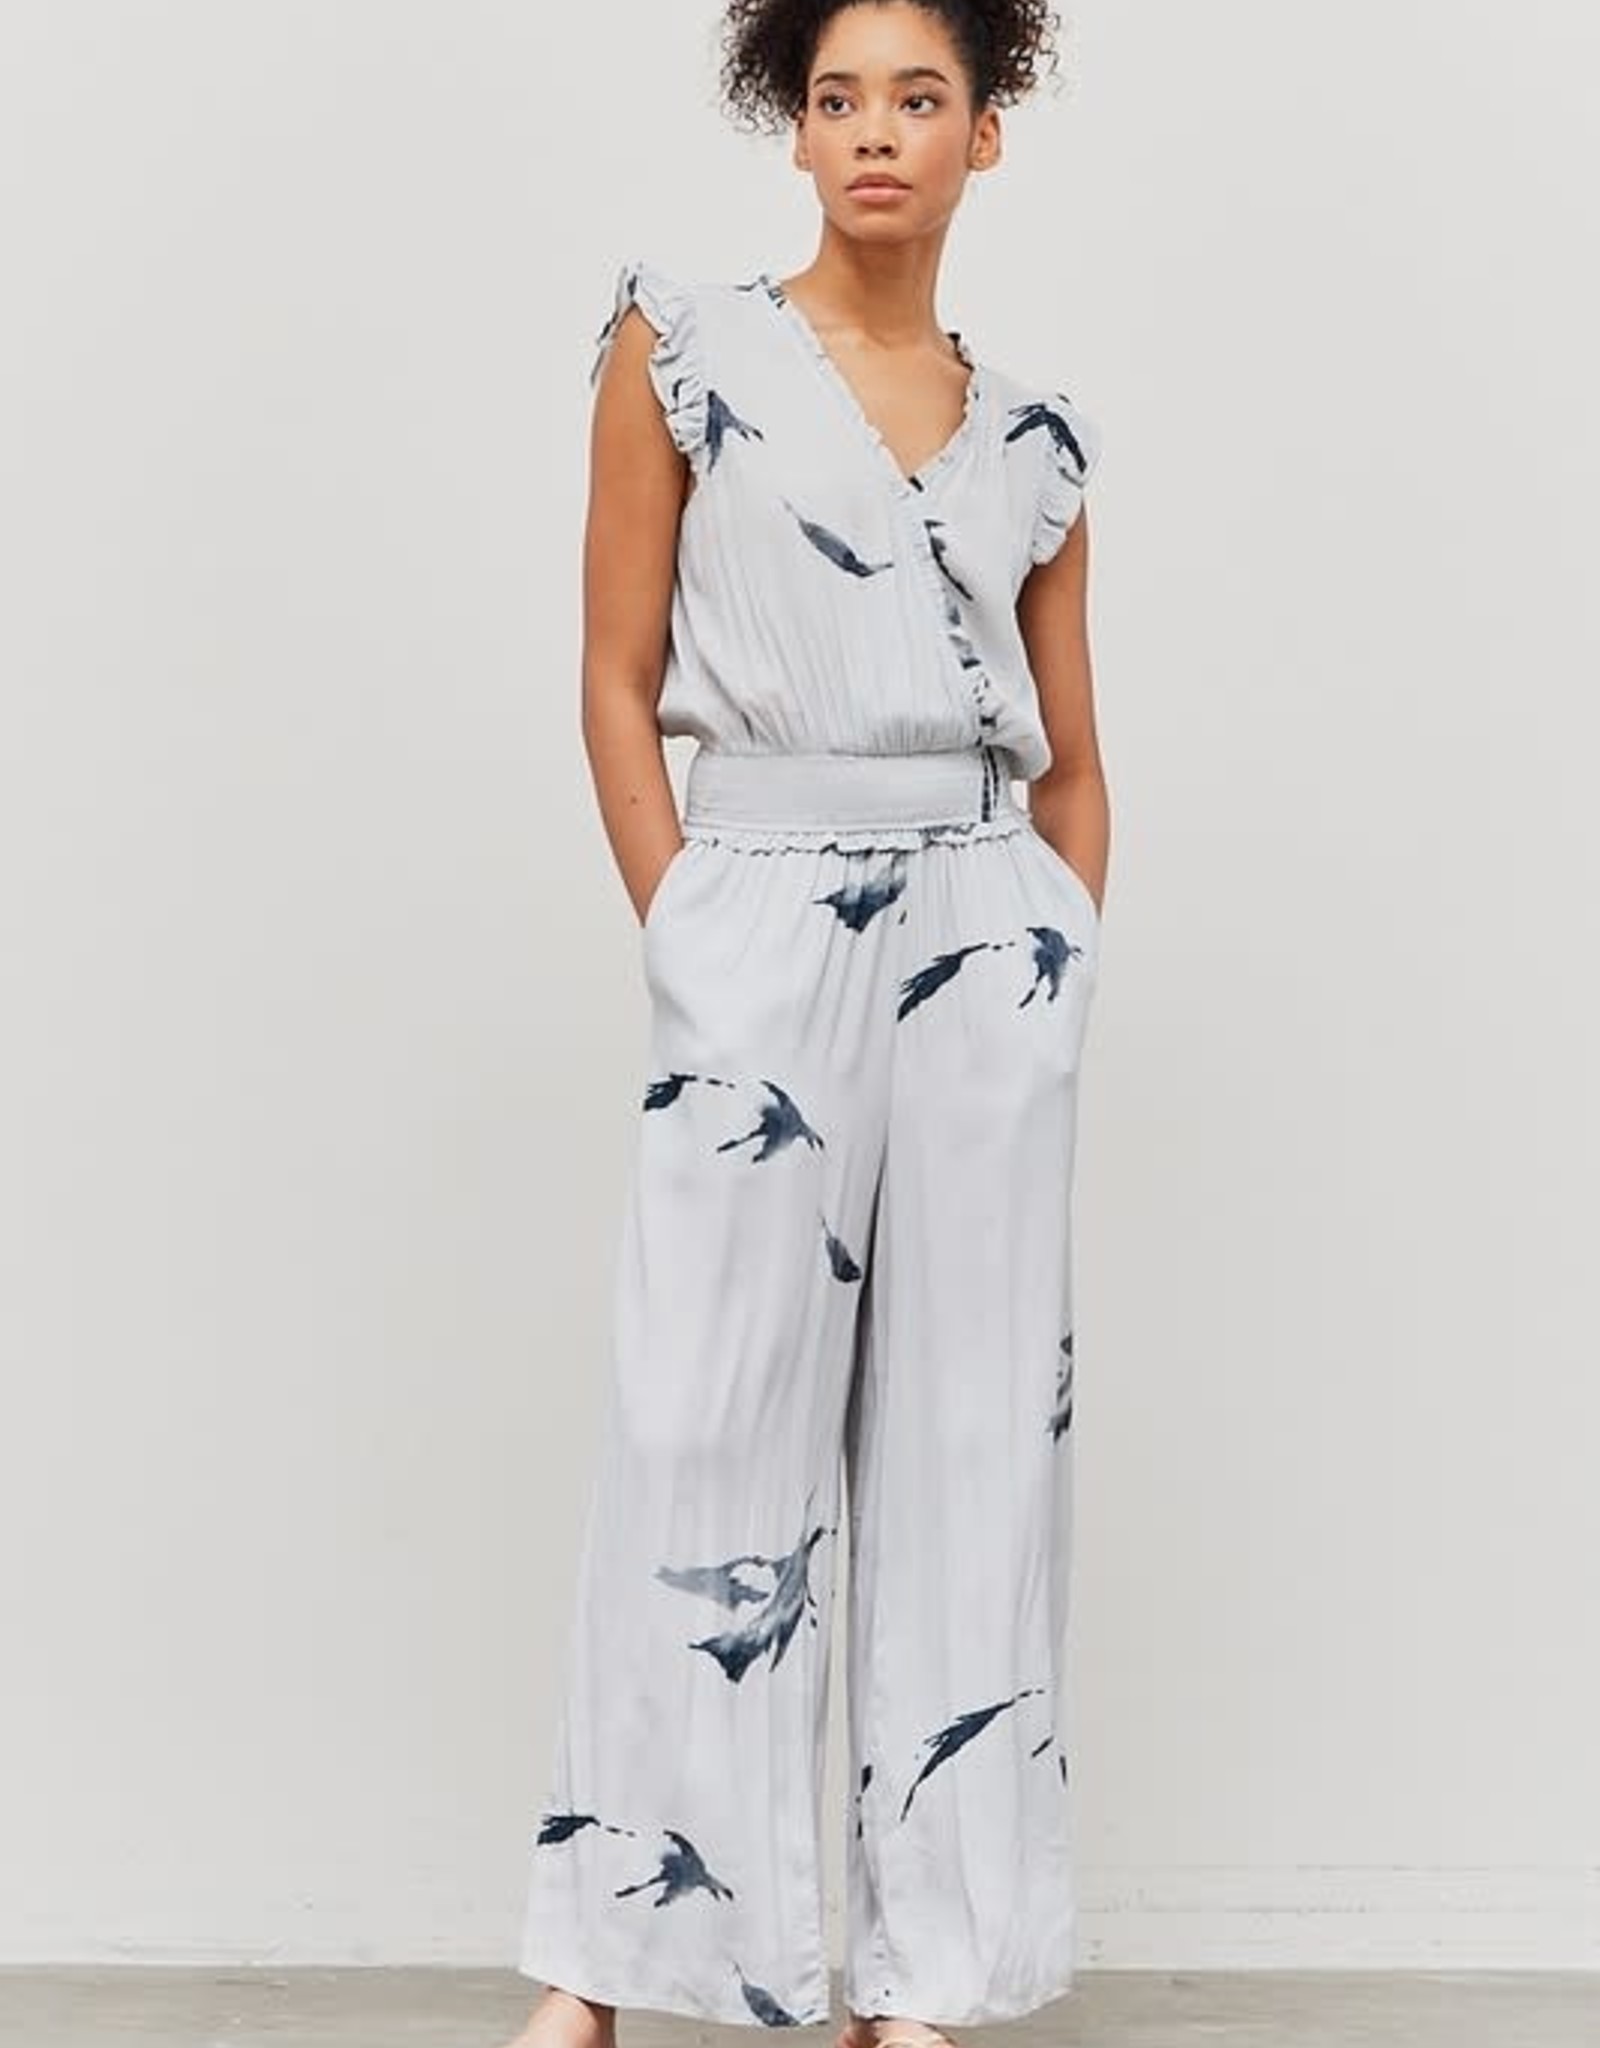 Grade and Gather Wisp Print Jumpsuit